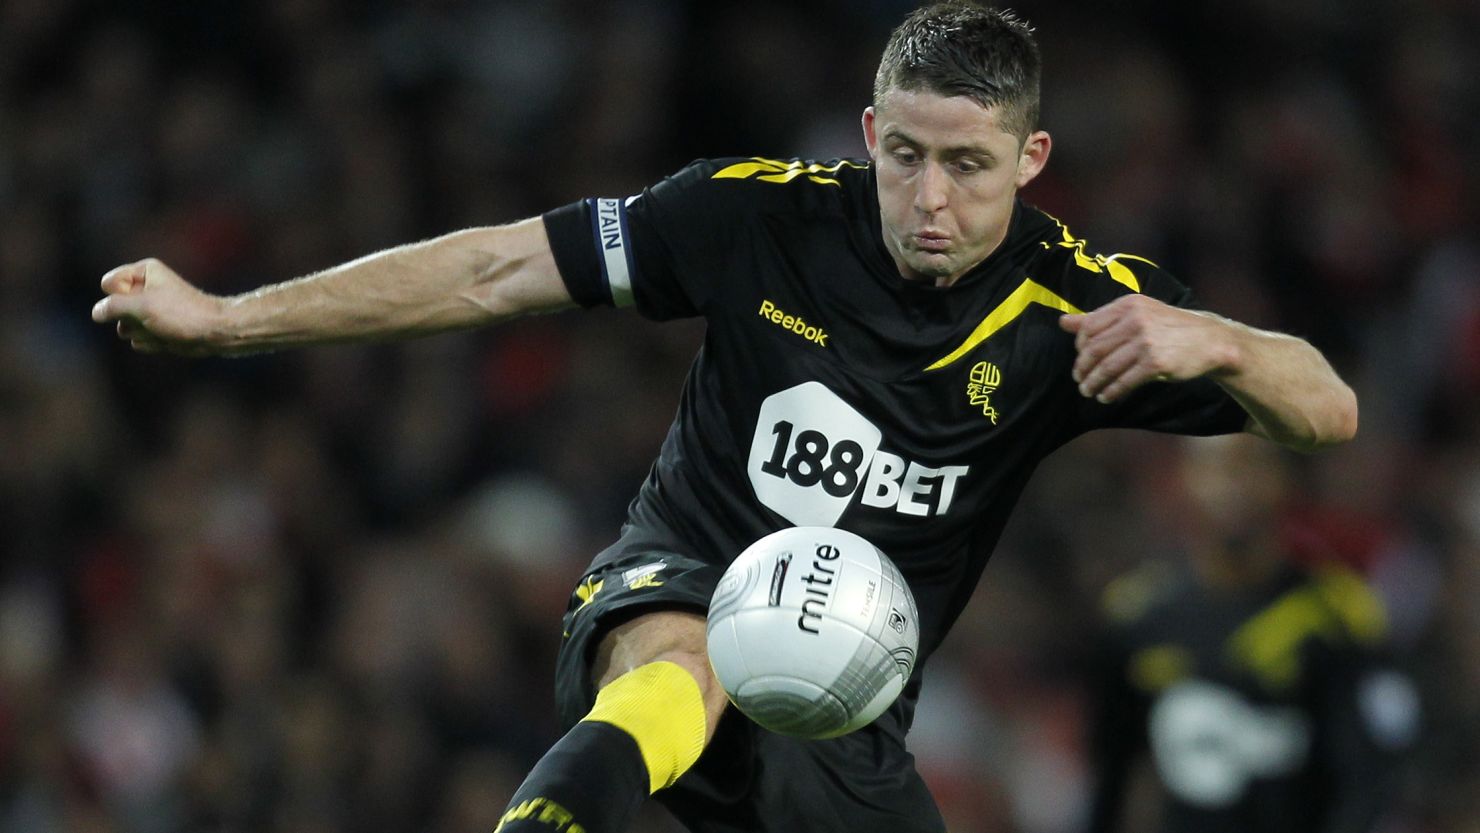 England defender Gary Cahill has signed a five-and-a-half year contract to become a Chelsea player.